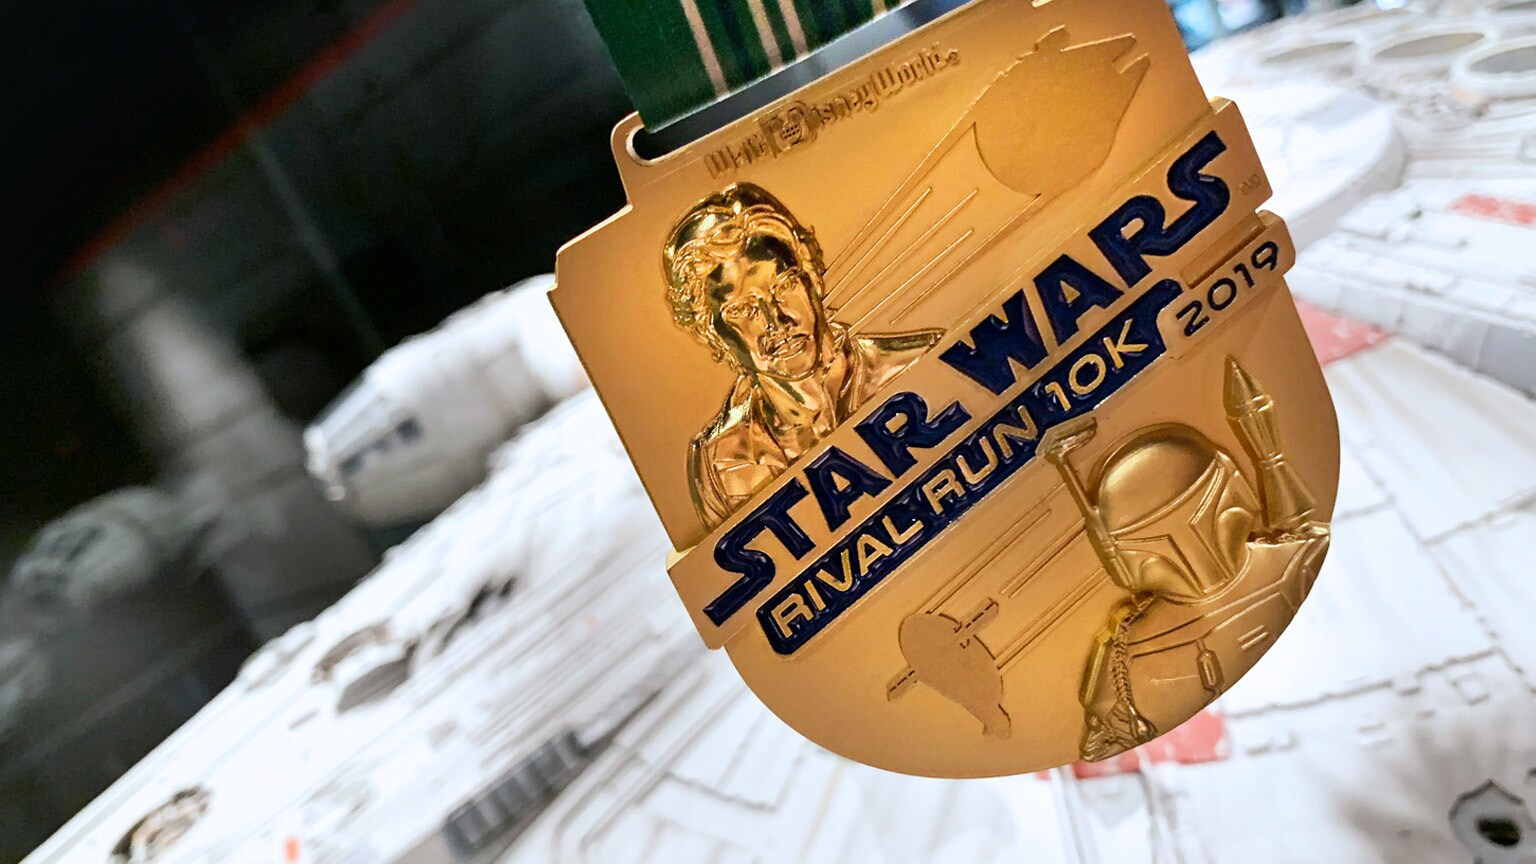 Get a First Look at the Star Wars runDisney 2019 Medals